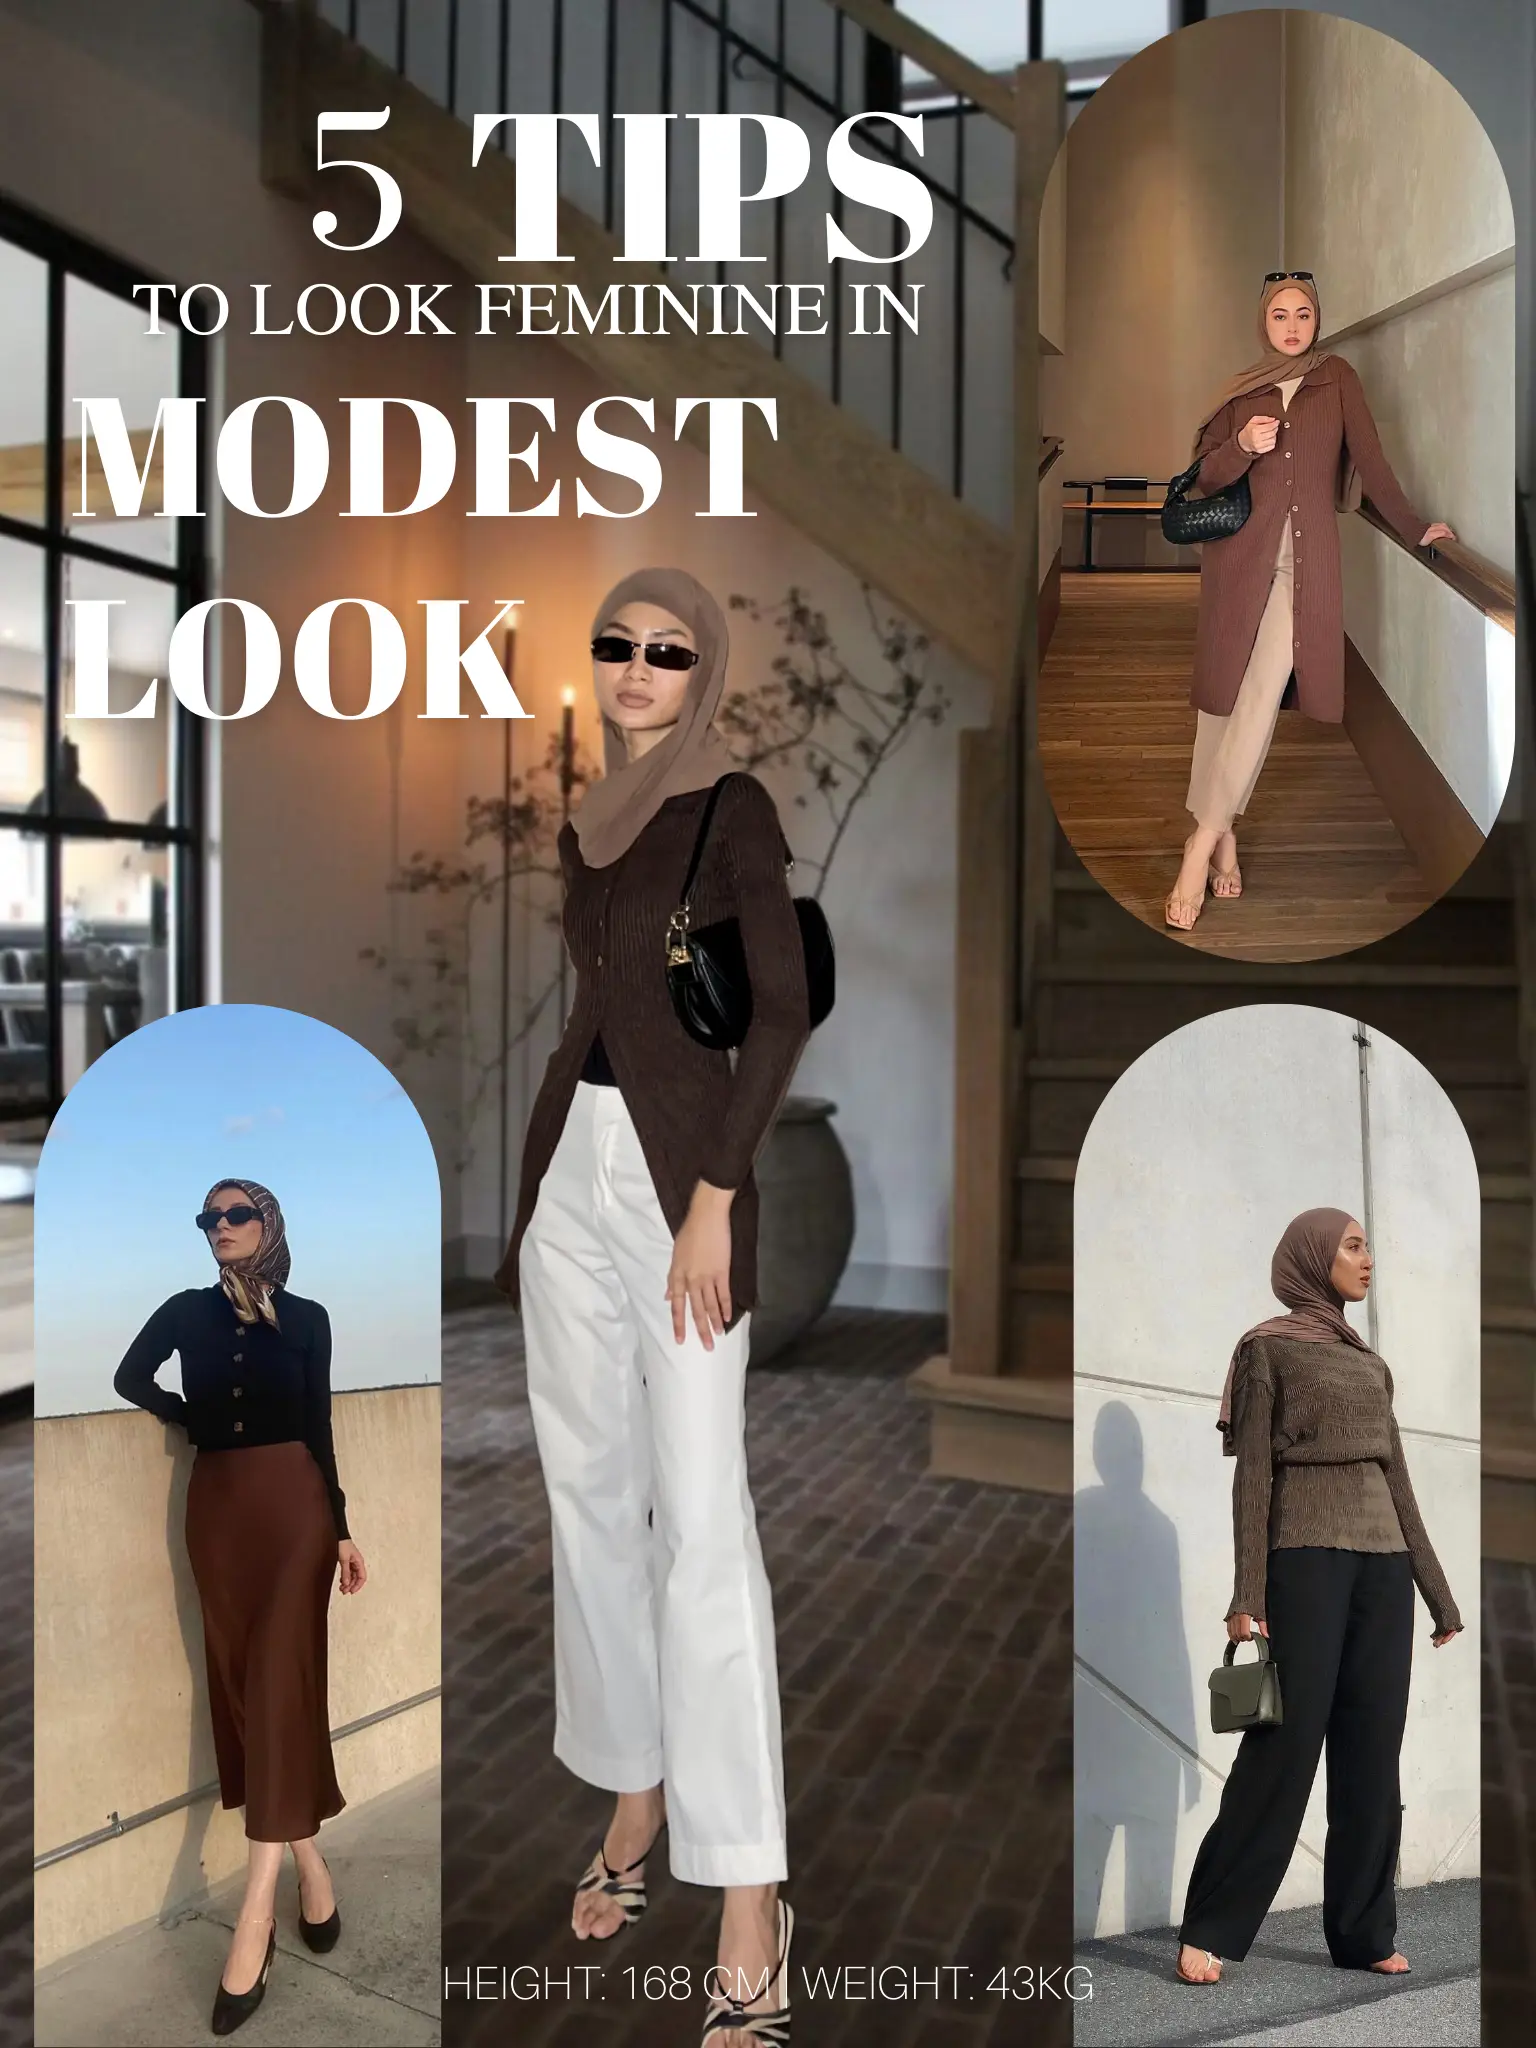 5 Tips To Look Feminine In Modest Look's images(0)